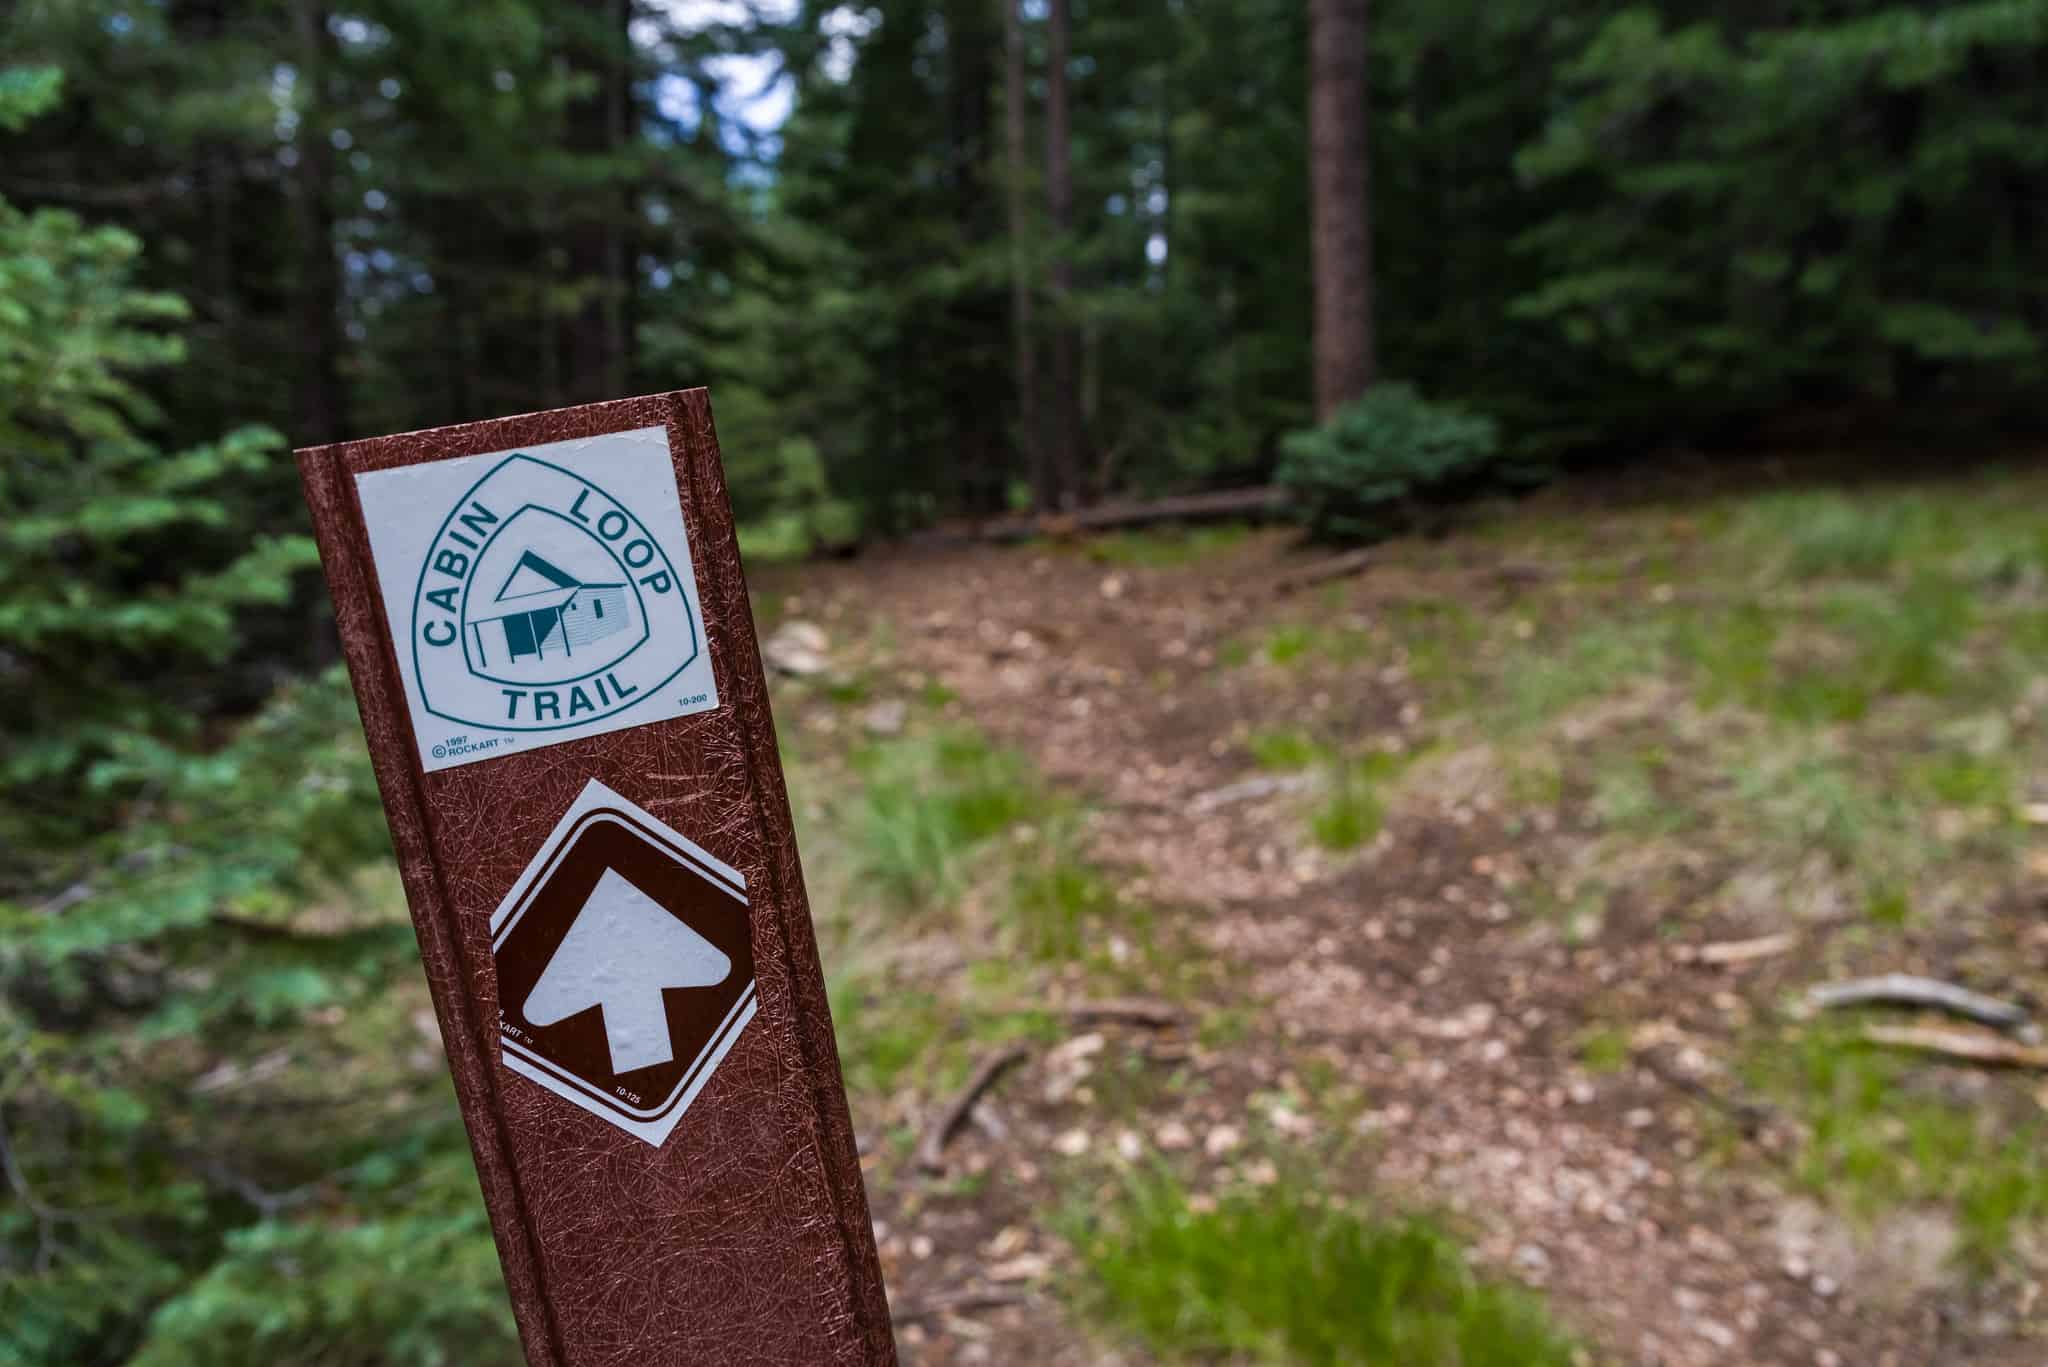 A trail marker begins a trail into the forest.